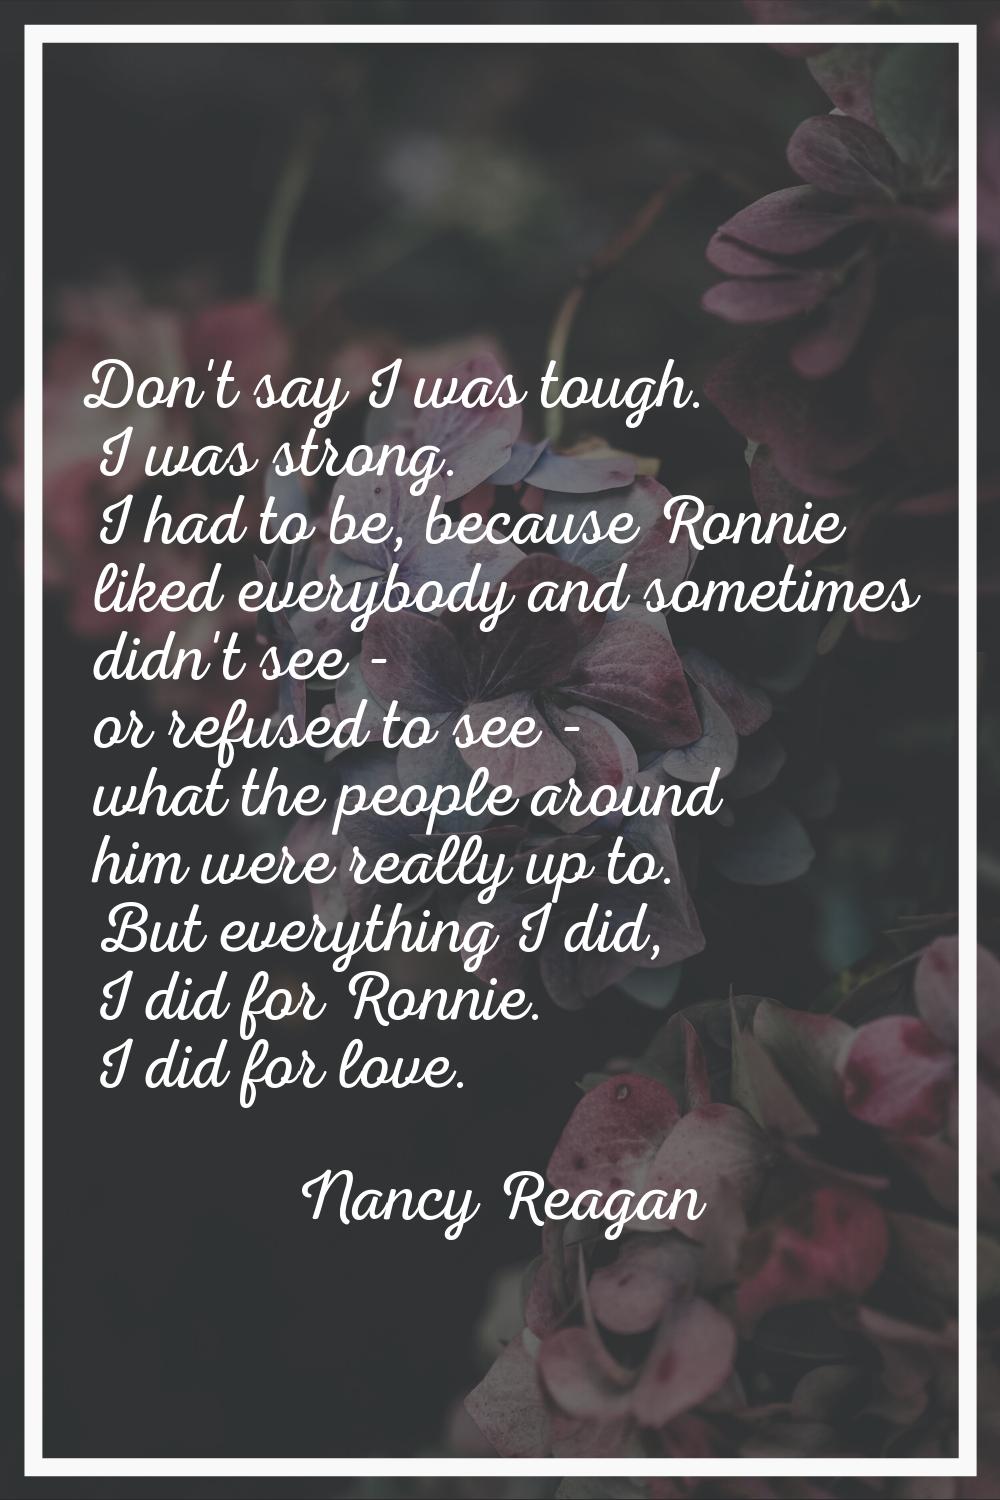 Don't say I was tough. I was strong. I had to be, because Ronnie liked everybody and sometimes didn